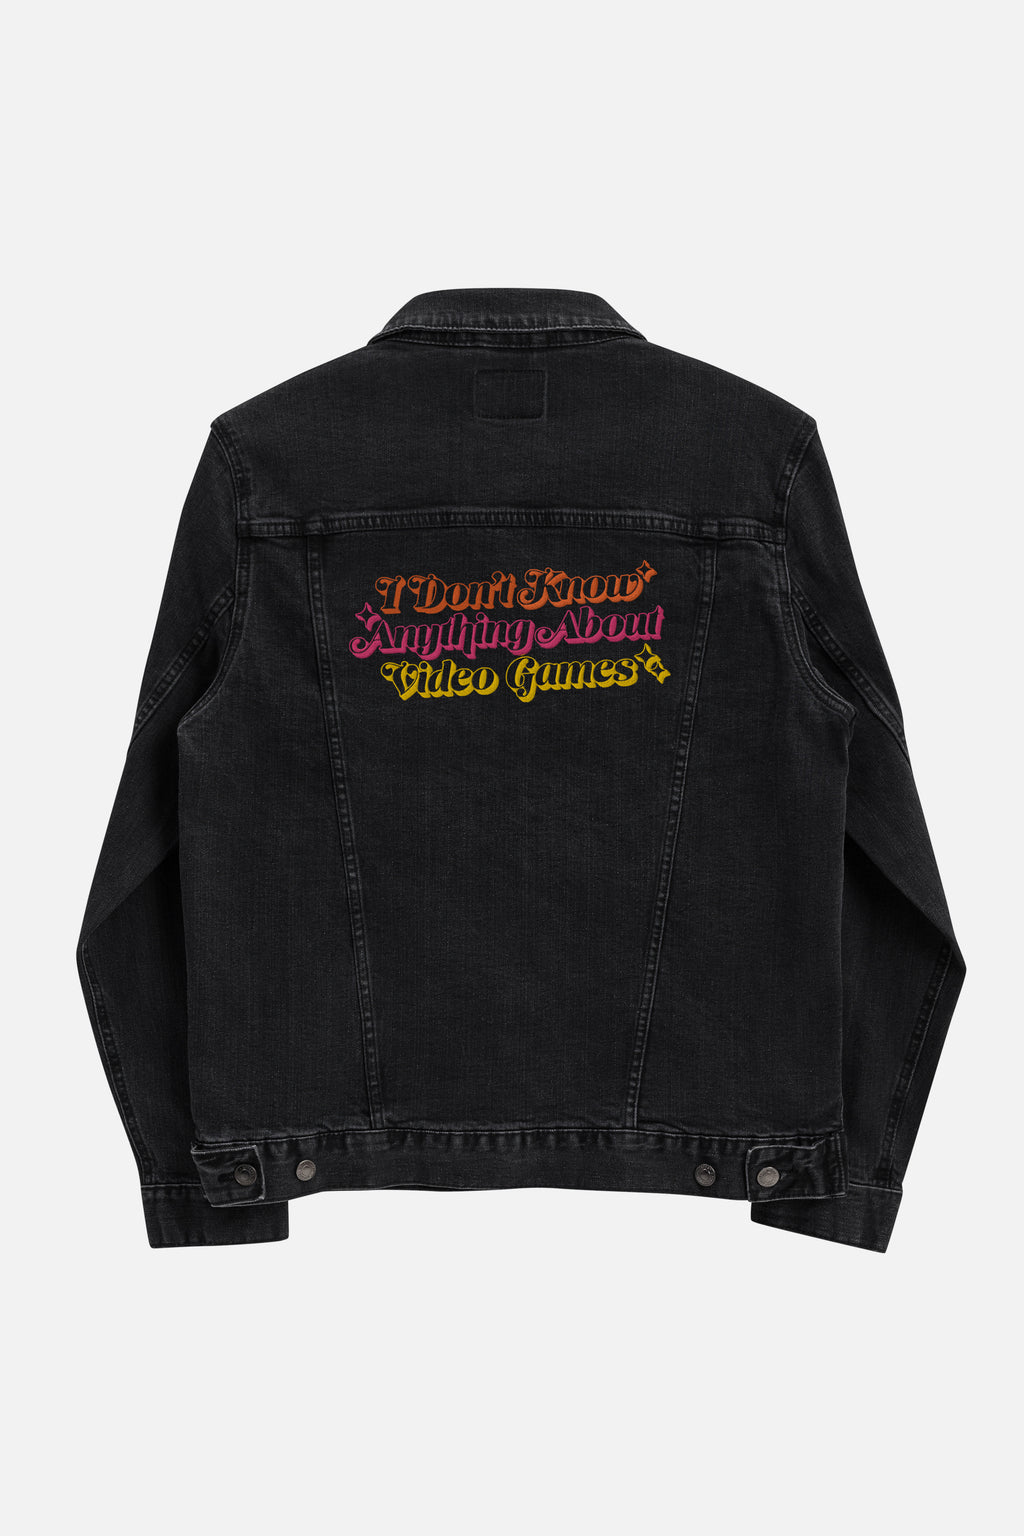 I Don't Know Anything About Video Games Unisex Denim Jacket | Sam Maggs